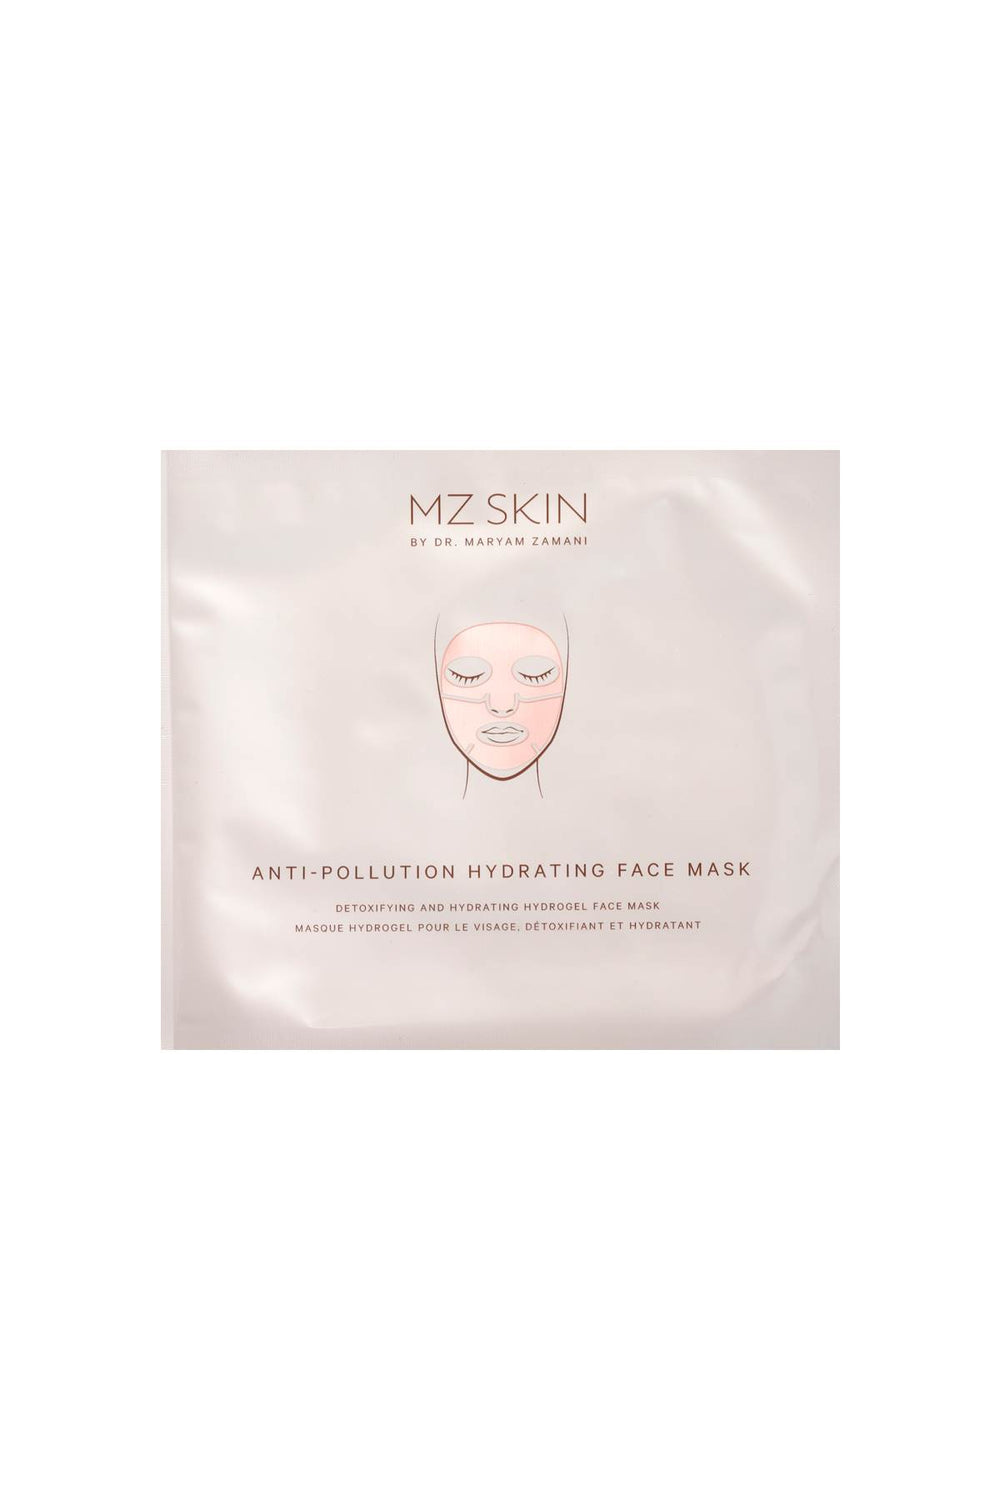 Mz skin anti-pollution hydrating face mask-1